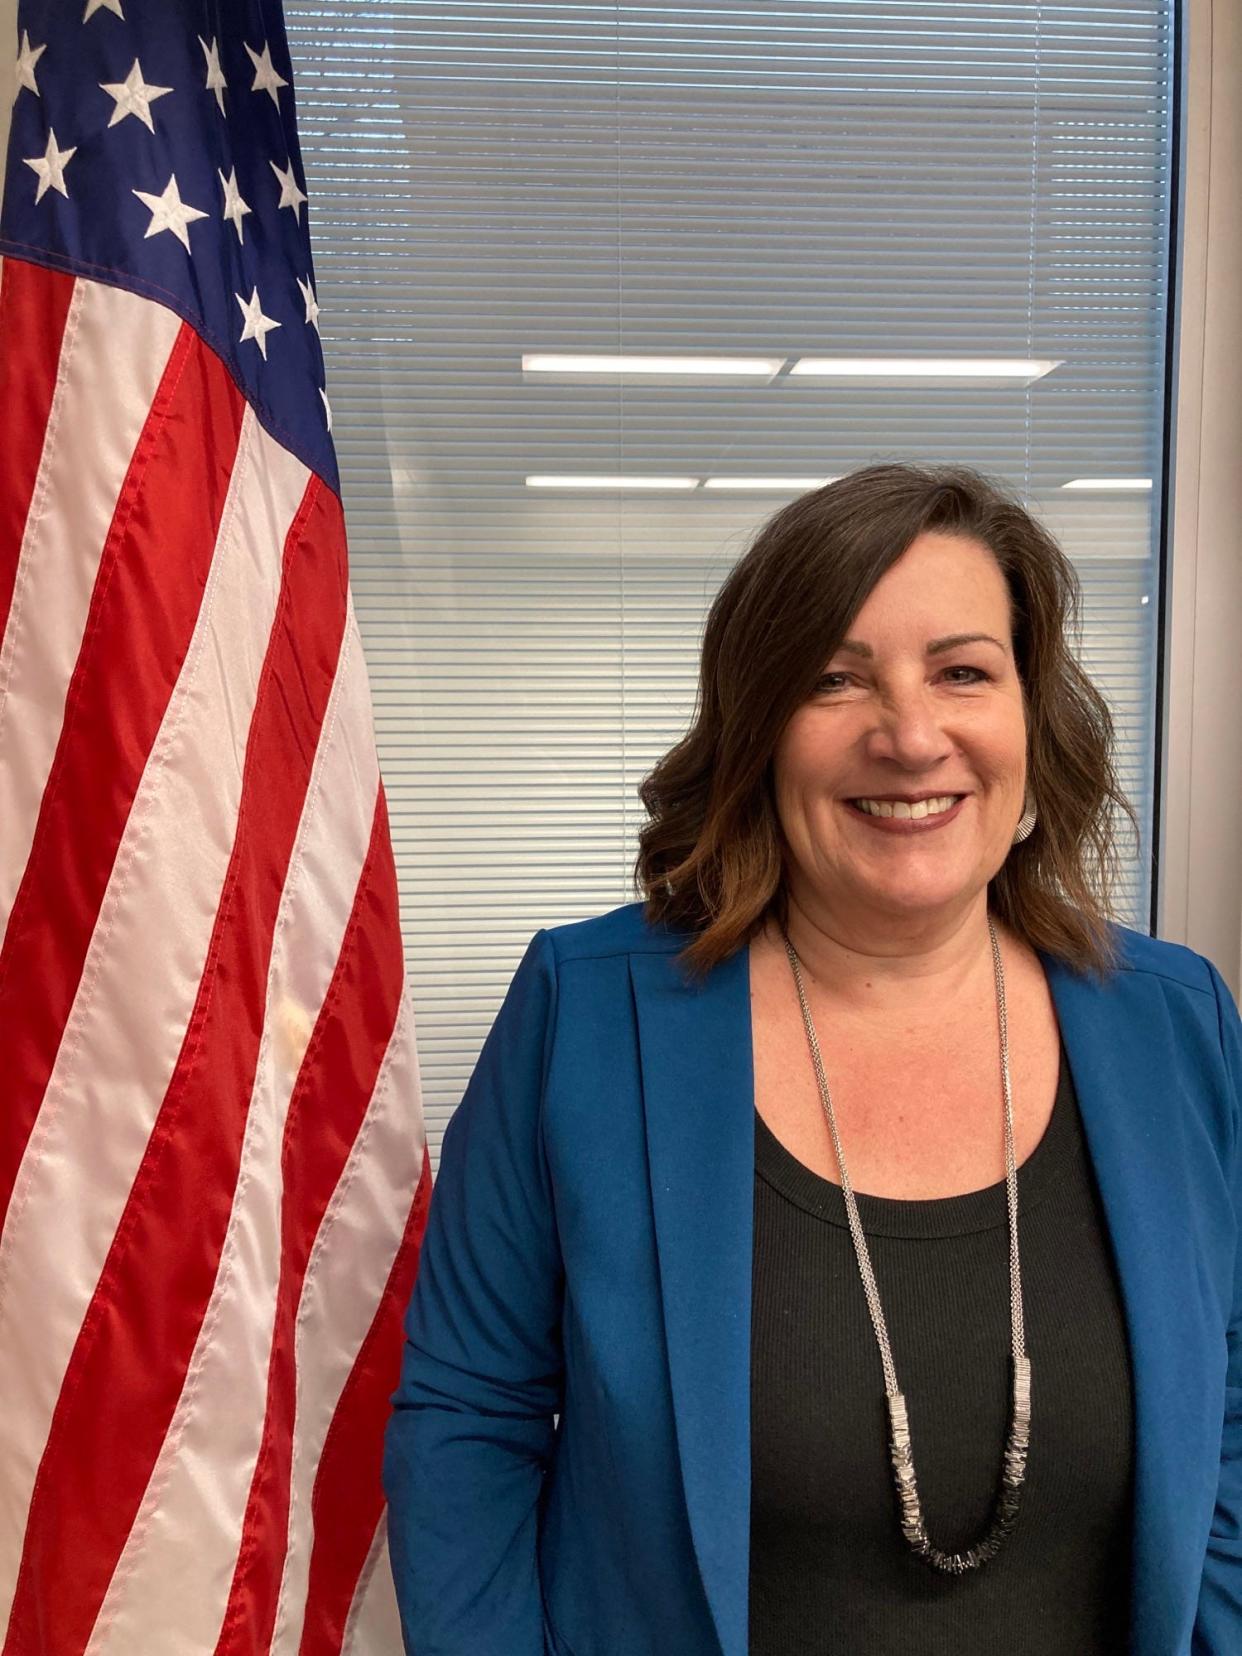 The Cudahy School Board unanimously selected current Trevor-Wilmot Consolidated School District superintendent Michelle Garven to be the Cudahy School District's next superintendent. She will start July 1.